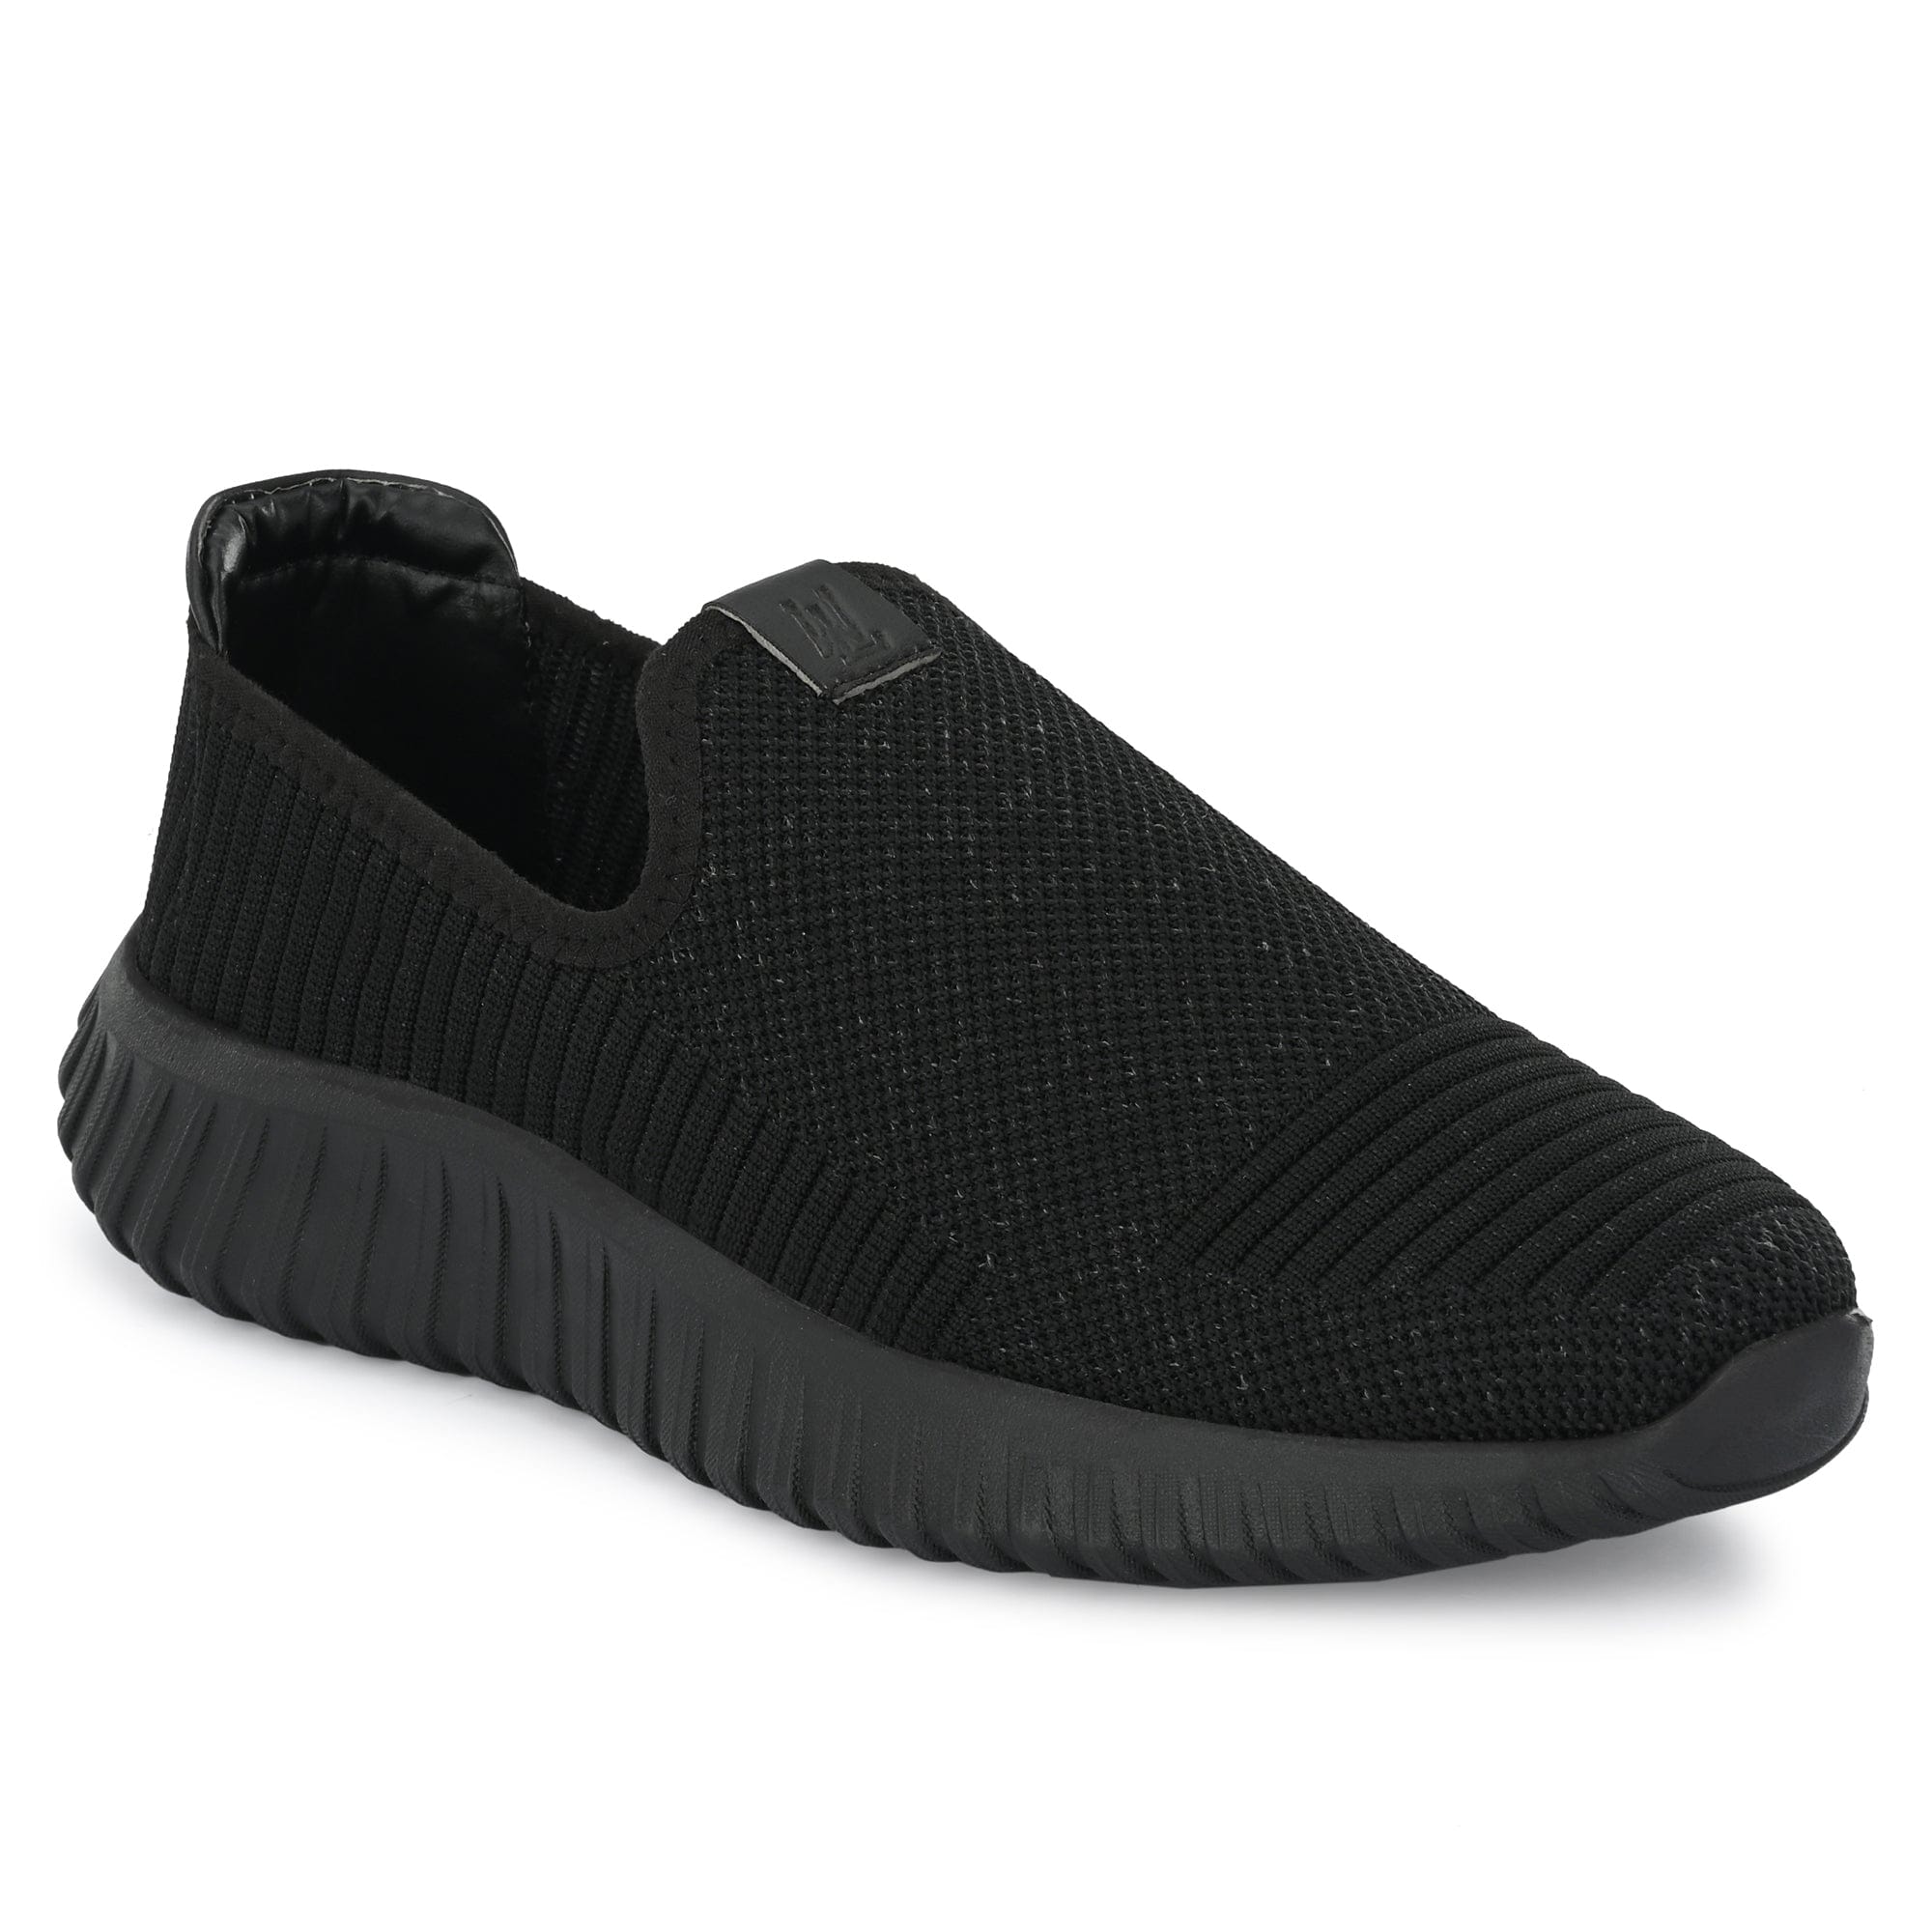 Legwork Drift Triple Black Comfortable ProKnit Sneakers Shoes made with 100% Recycled Plastic Bottles